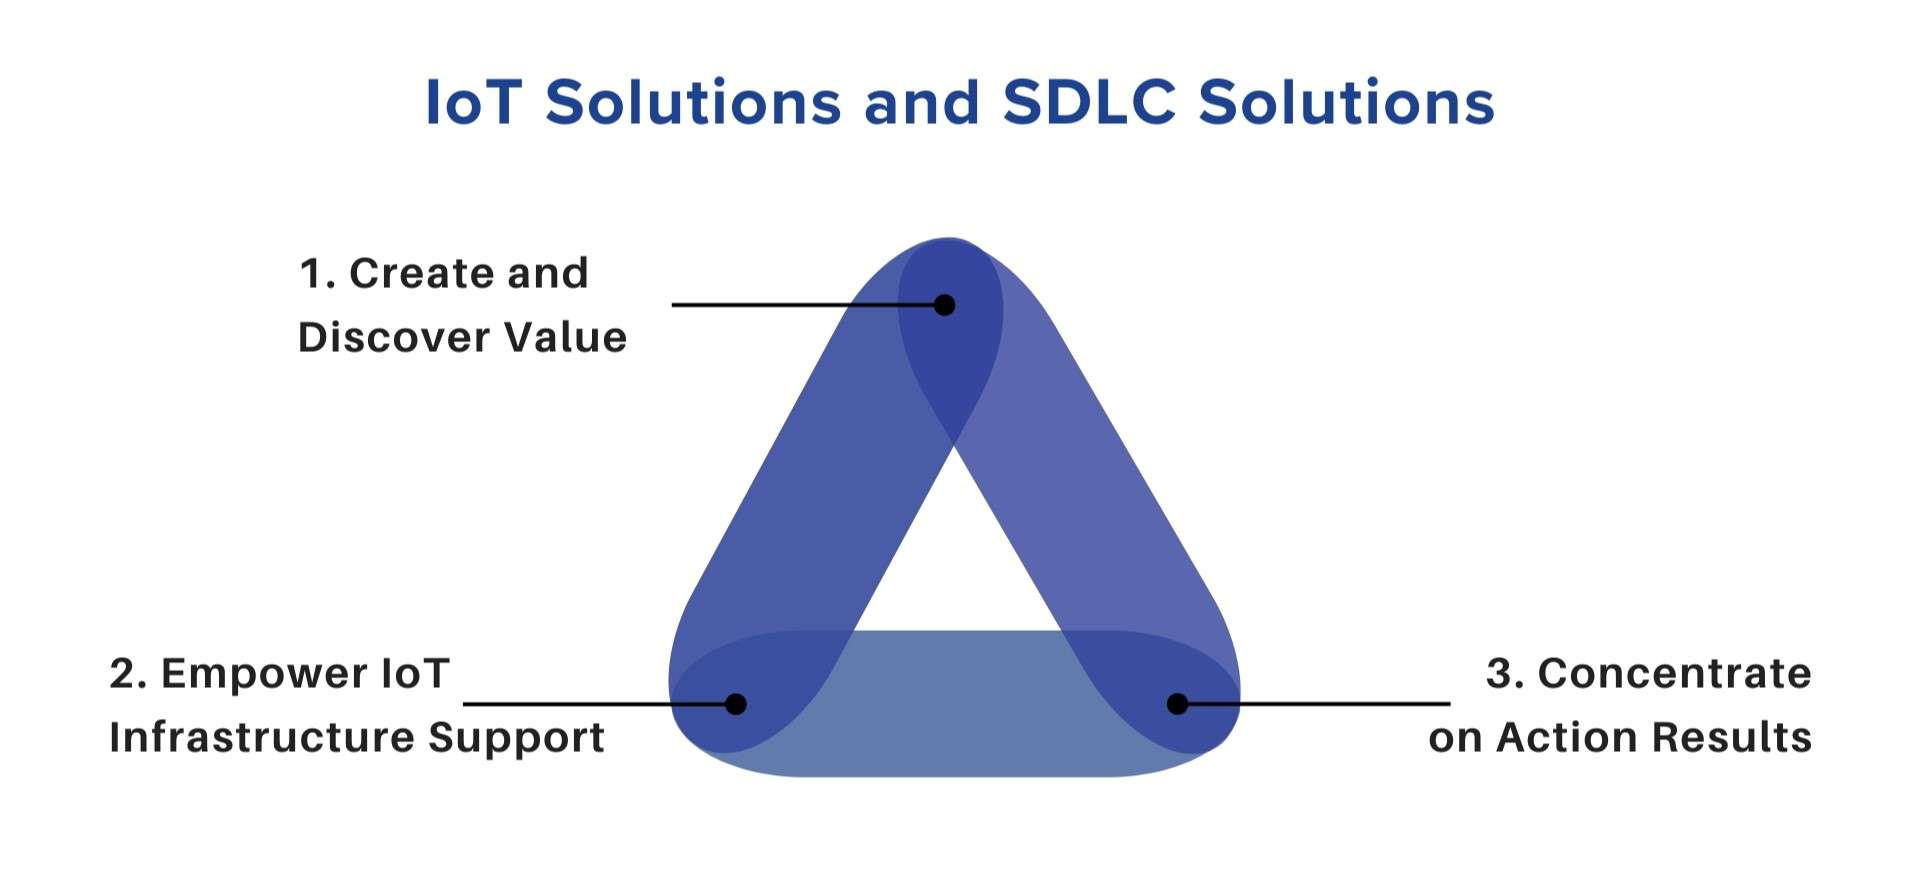 IoT Solutions and SDLC Solutions